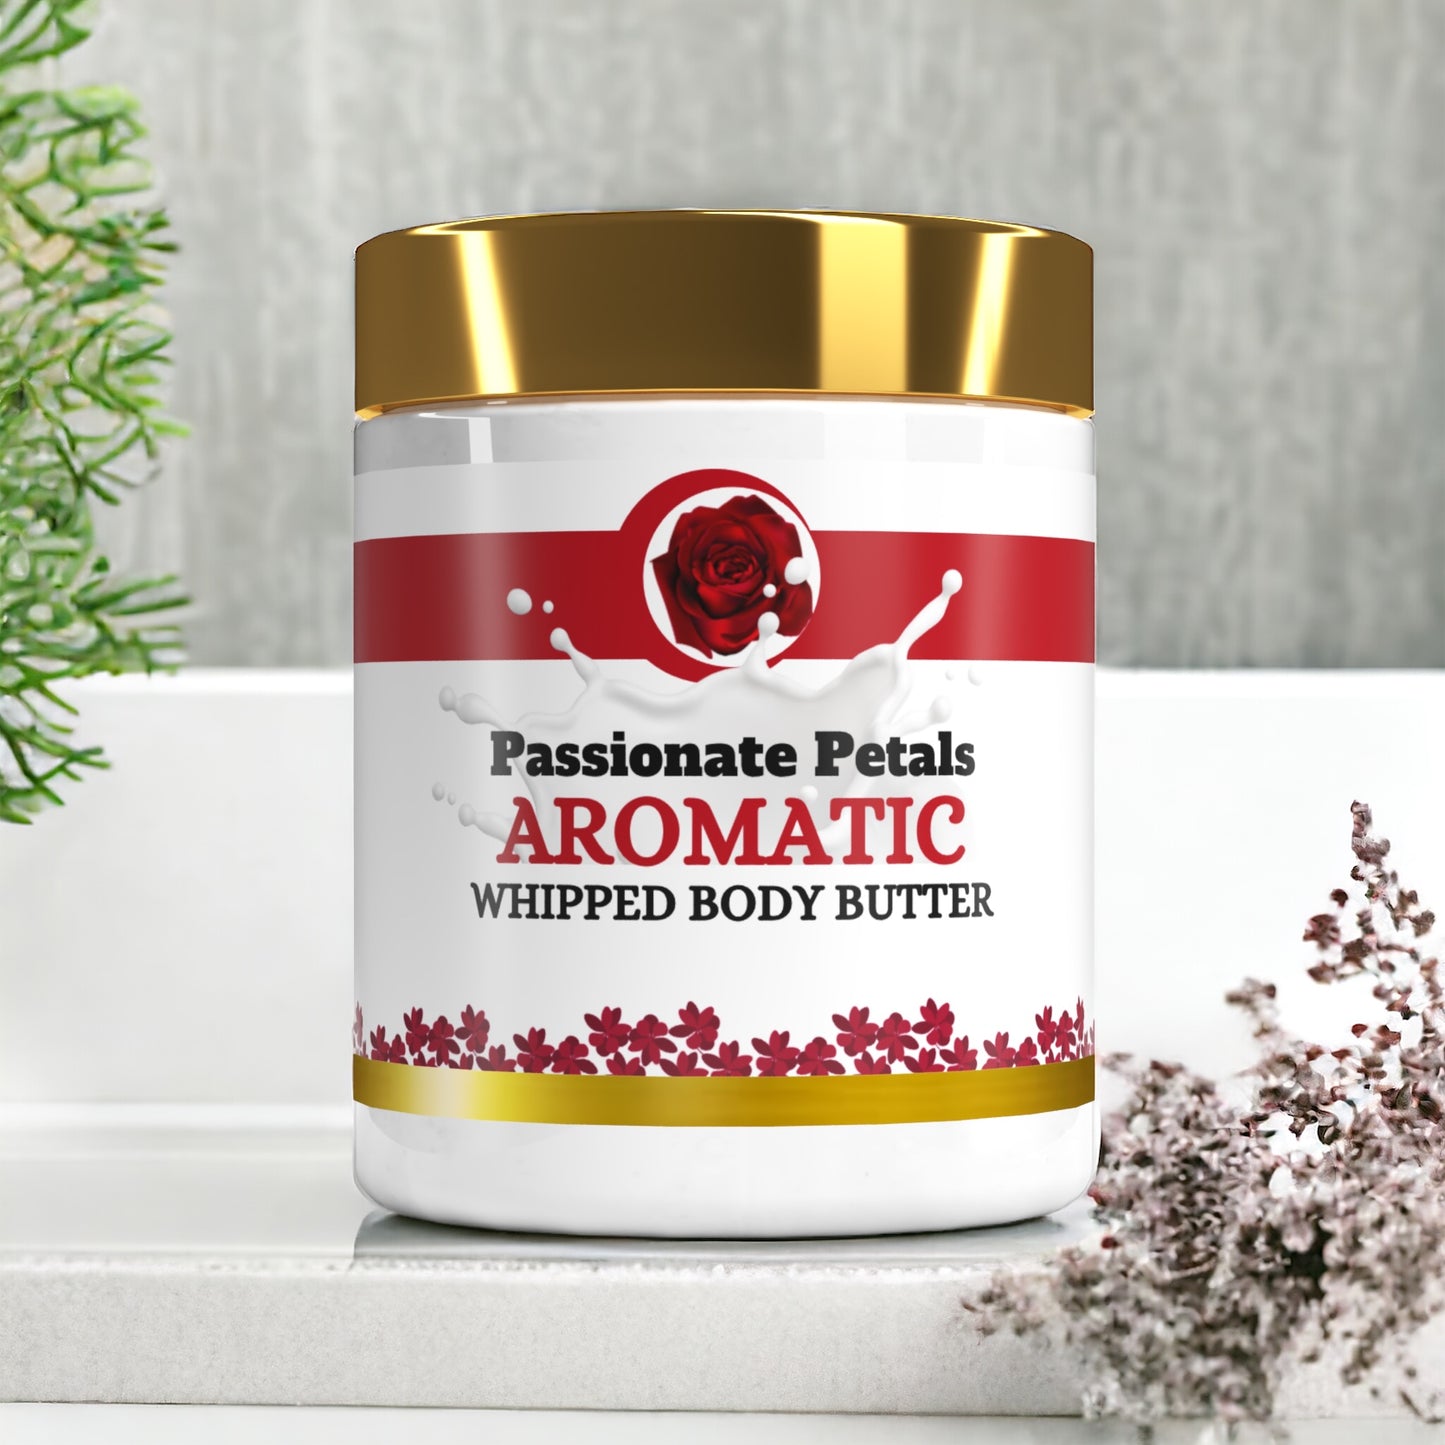 Passionate petals whipped Body Butter